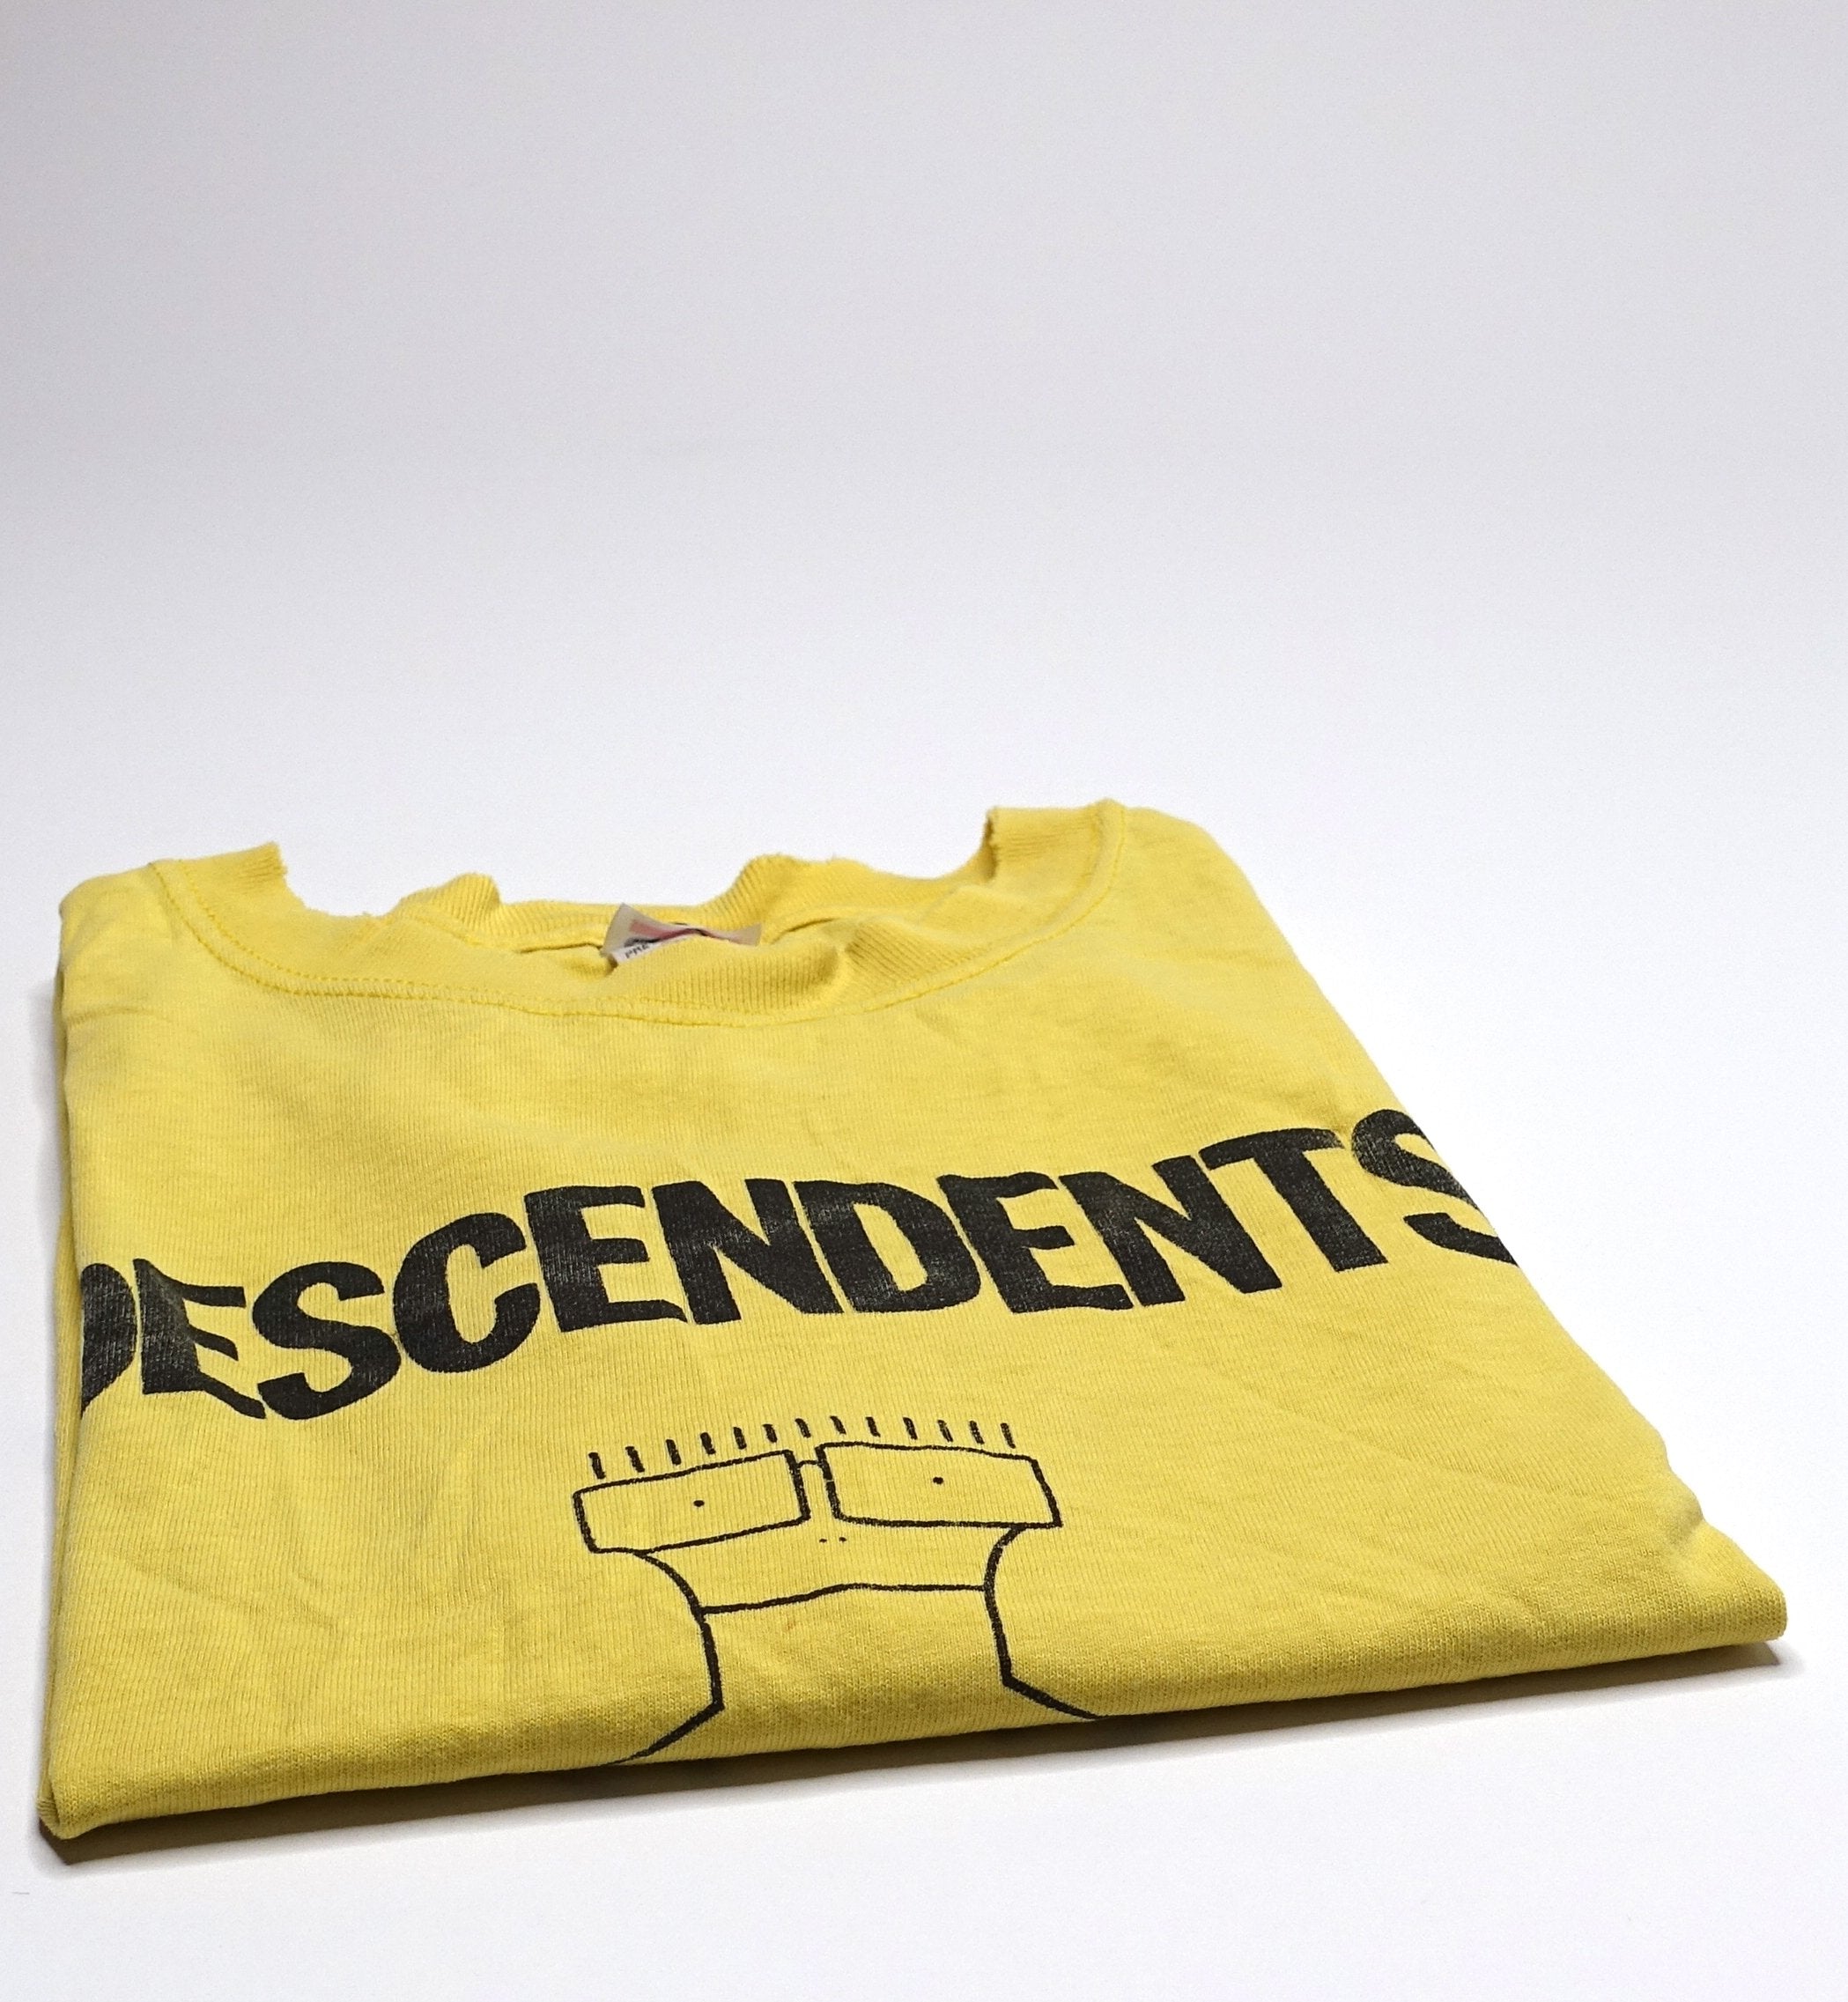 Descendents - I Don't Want To Grow Up Yellow Tour Shirt Size Large